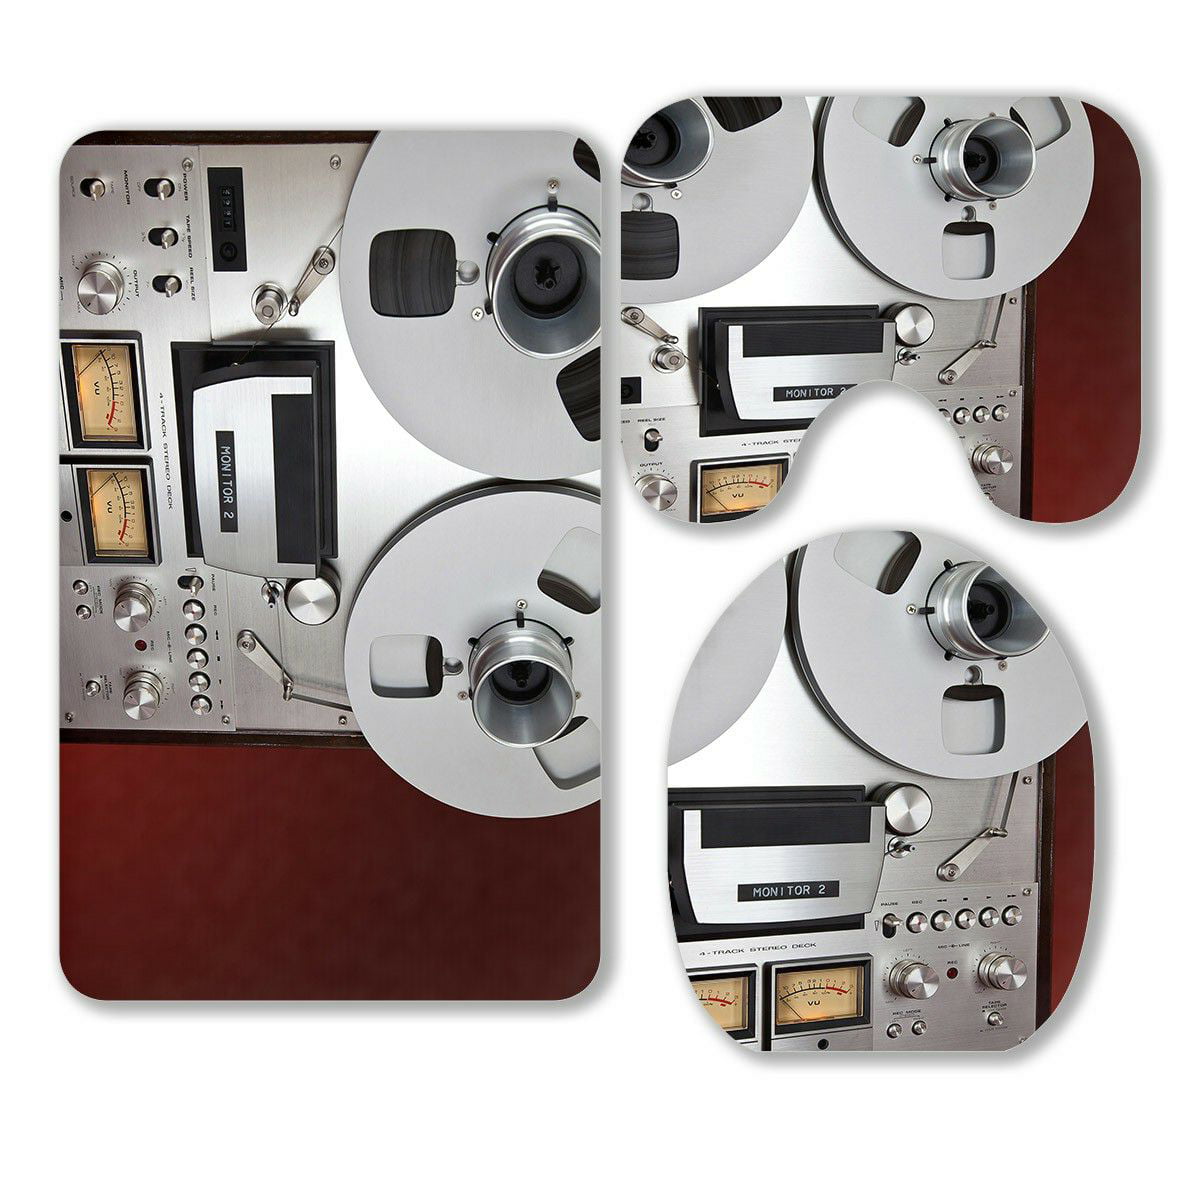 ECZJNT Stereo Open Reel Tape Deck Recorder Vintage Device 3 Piece Bathroom  Rugs Set Bath Rug Contour Mat and Toilet Lid Cover 